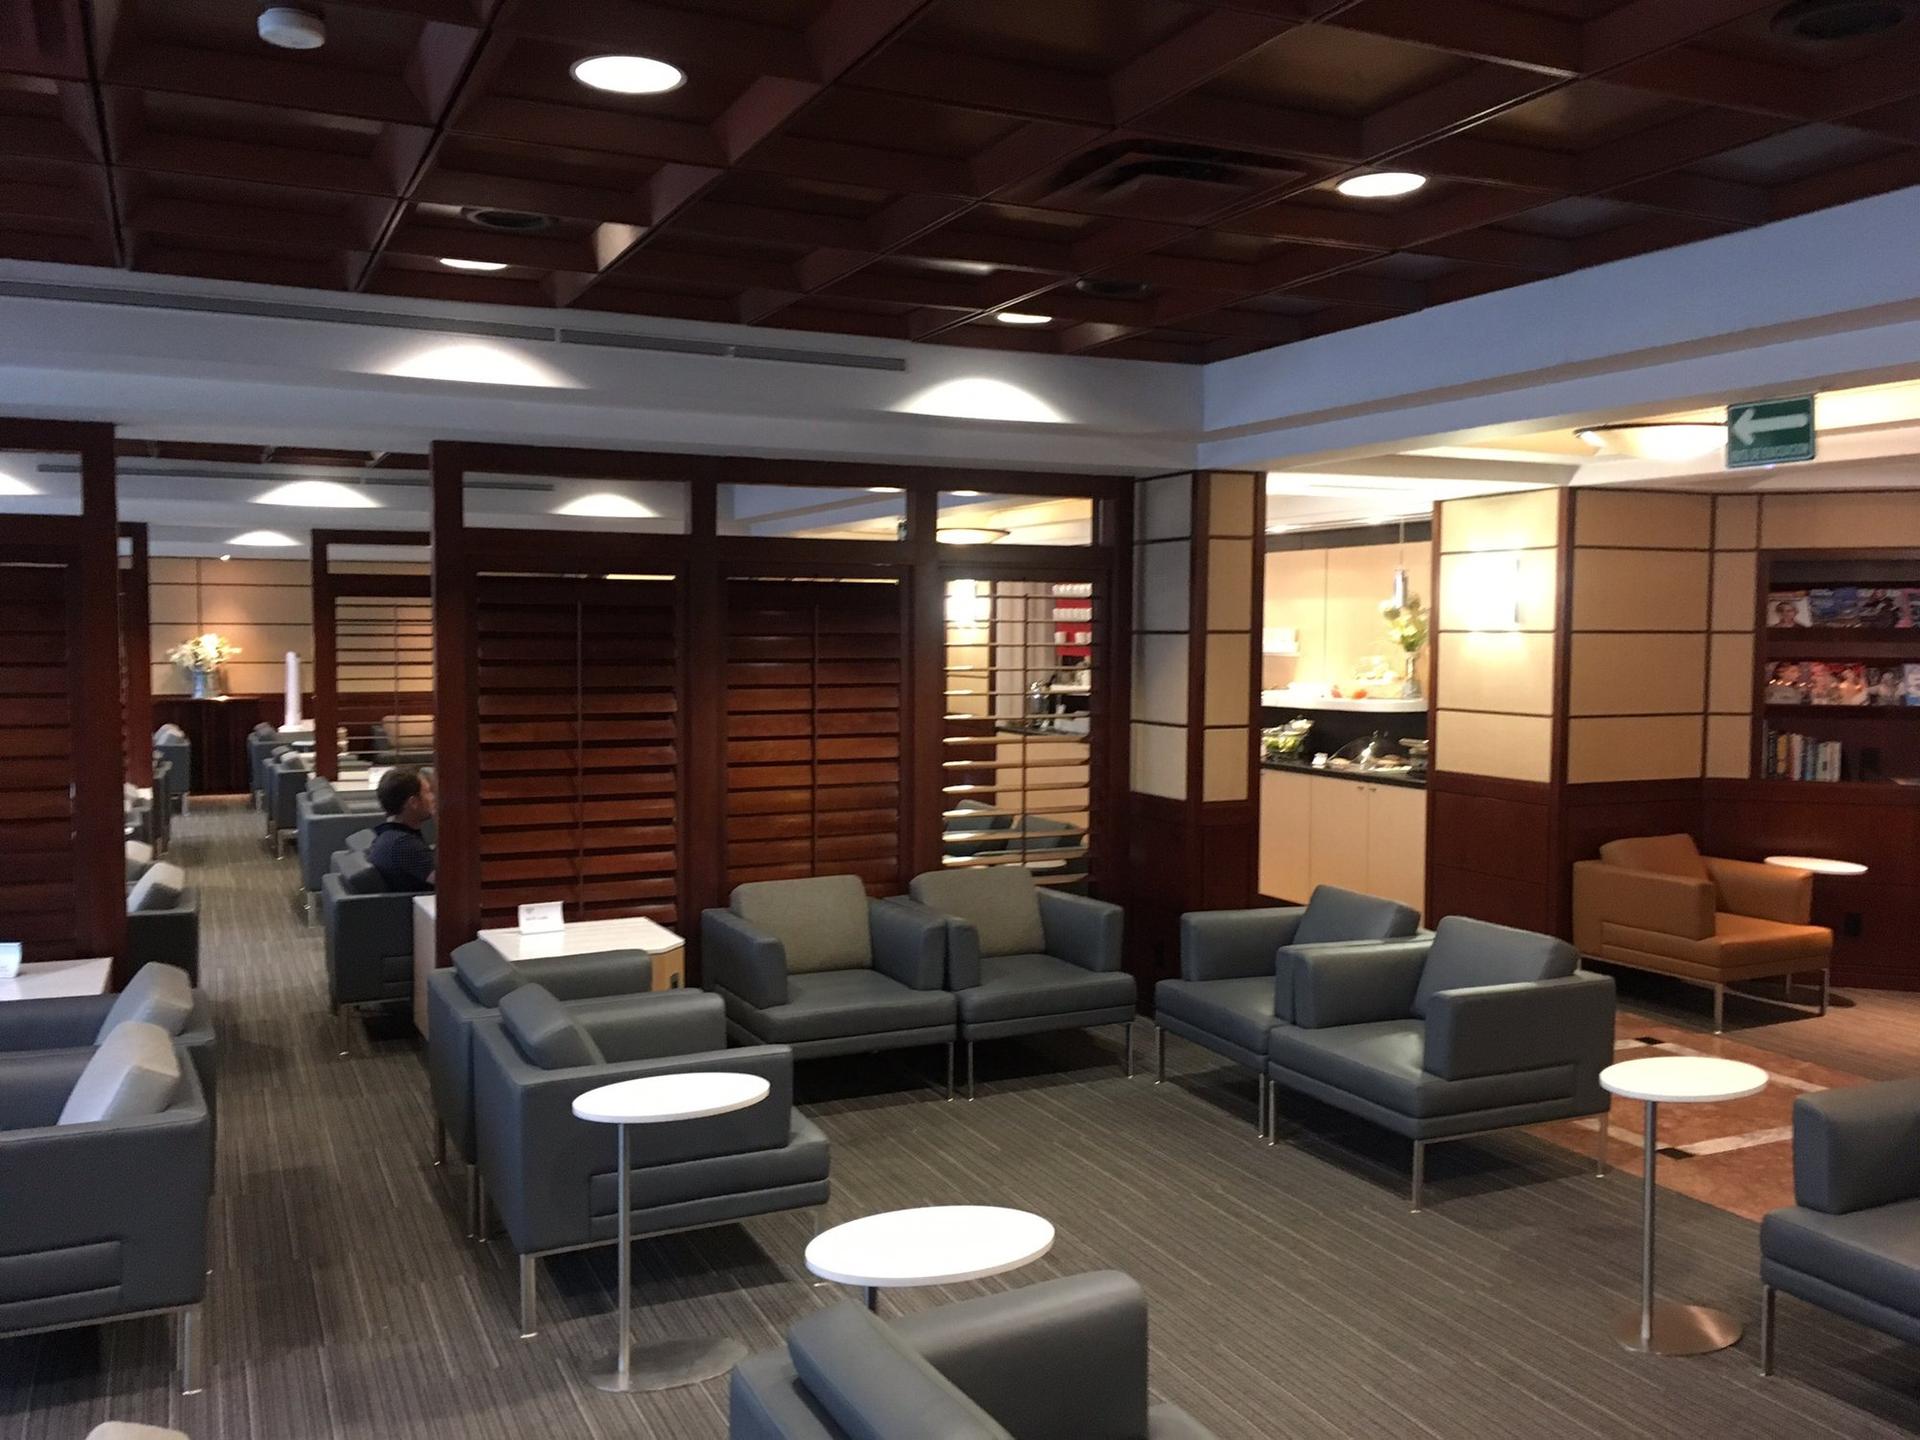 American Airlines Admirals Club image 23 of 32